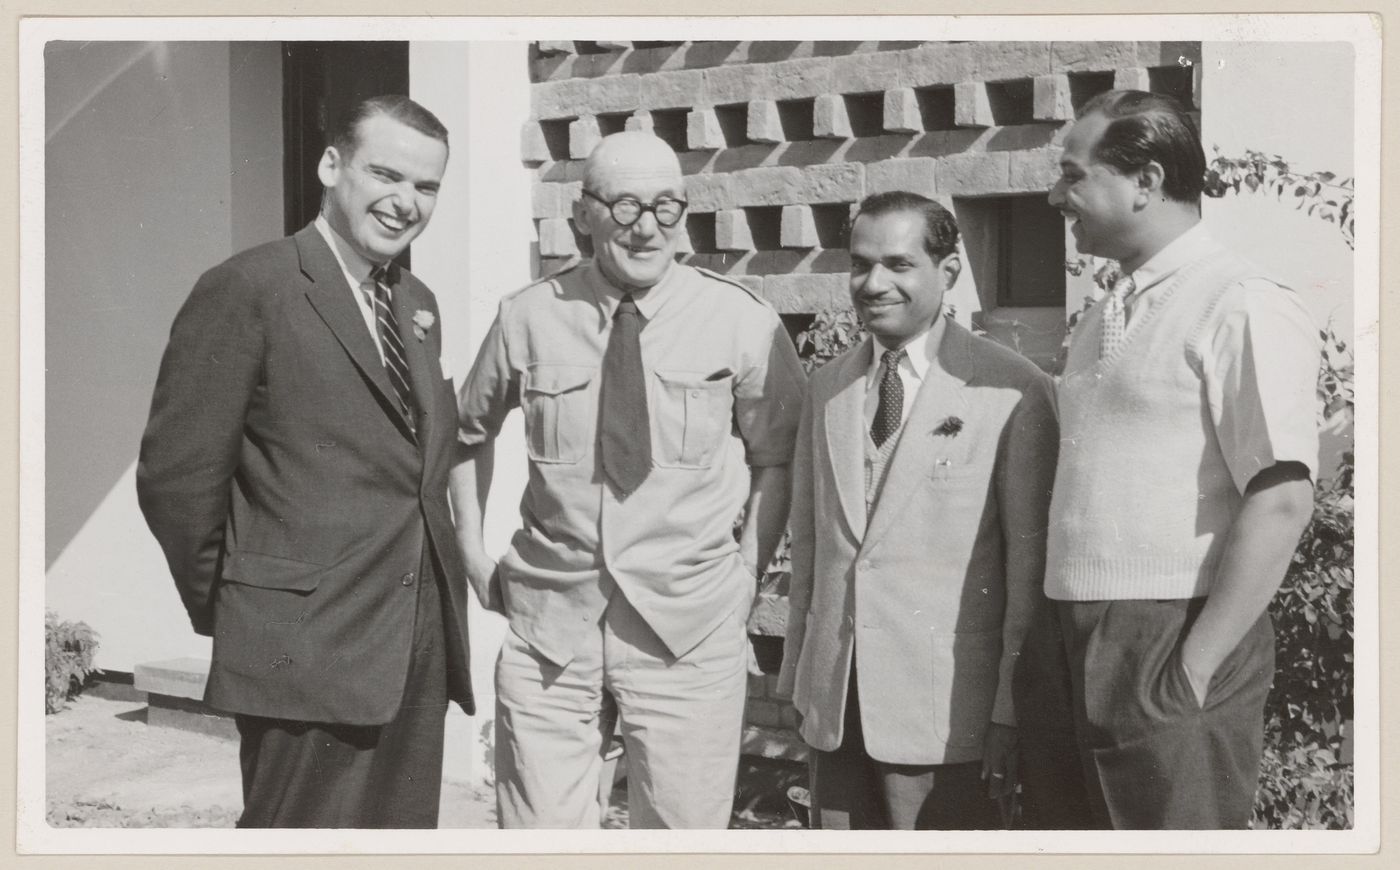 Parkin, Le Corbusier, and their colleagues in India, probably in Chandigarh